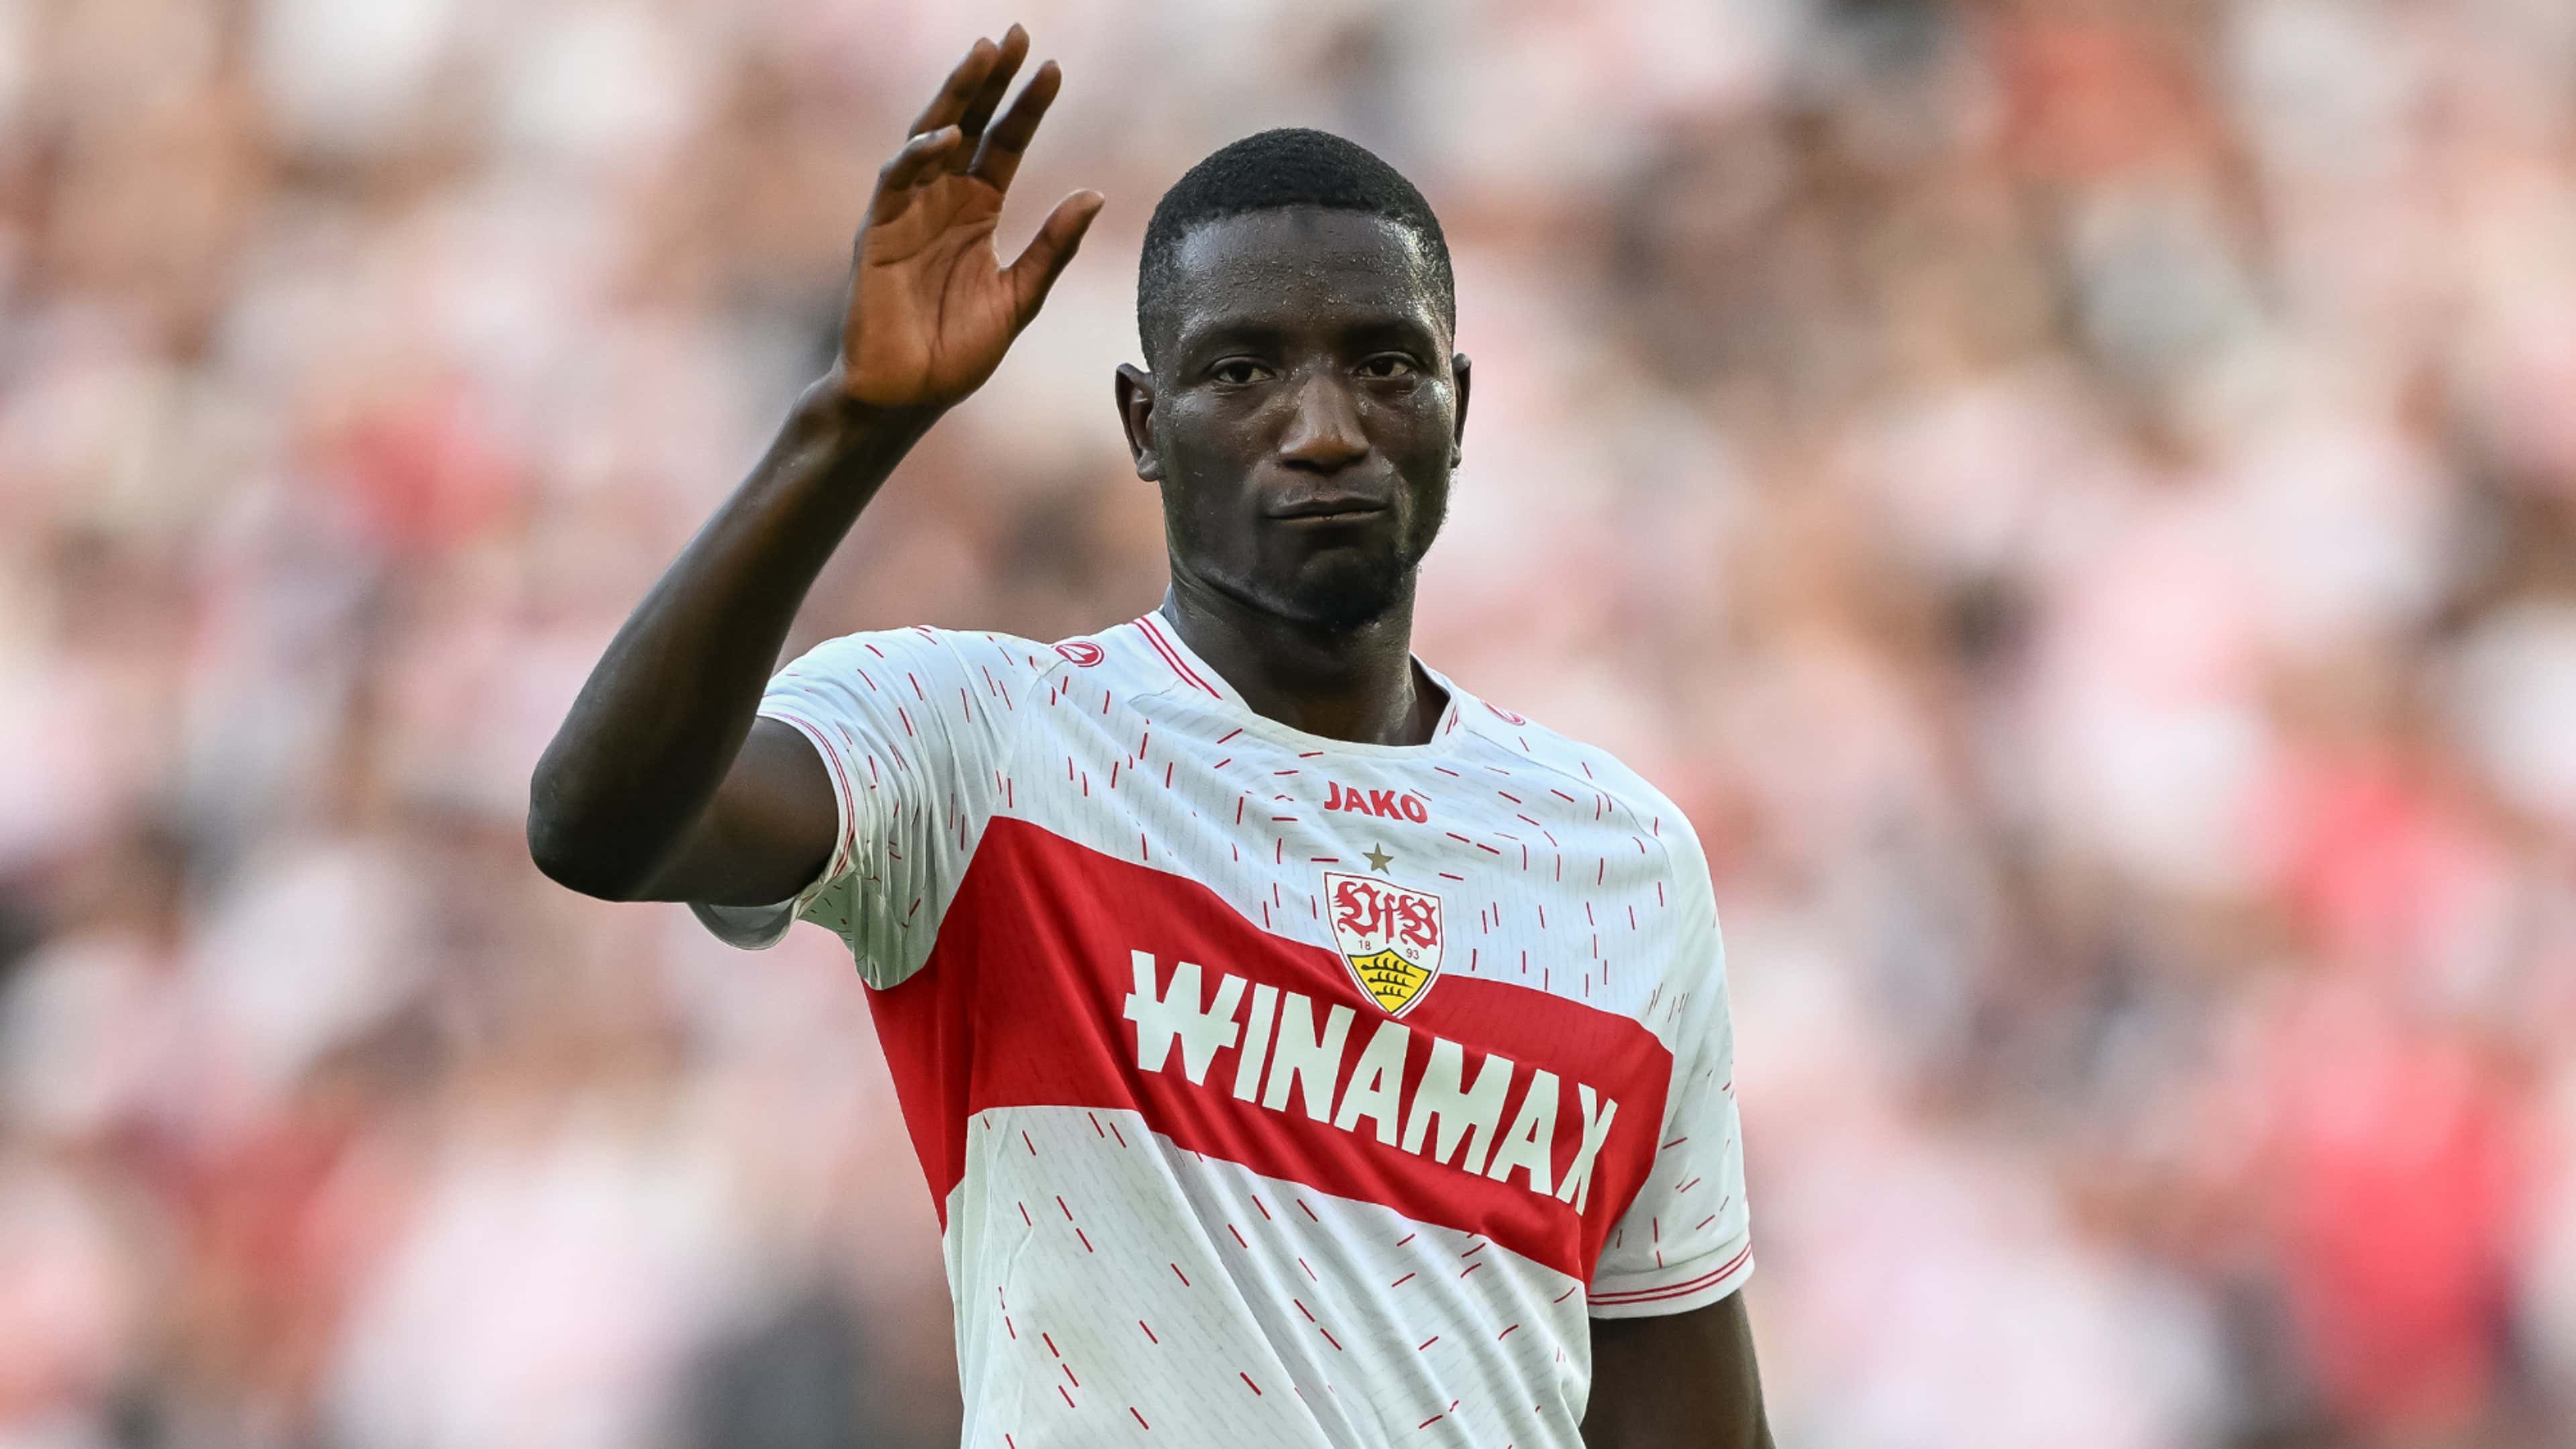  Serhou Guirassy, a player for VfB Stuttgart, is the subject of transfer rumors linking him to a move to Premier League club Borussia Dortmund.